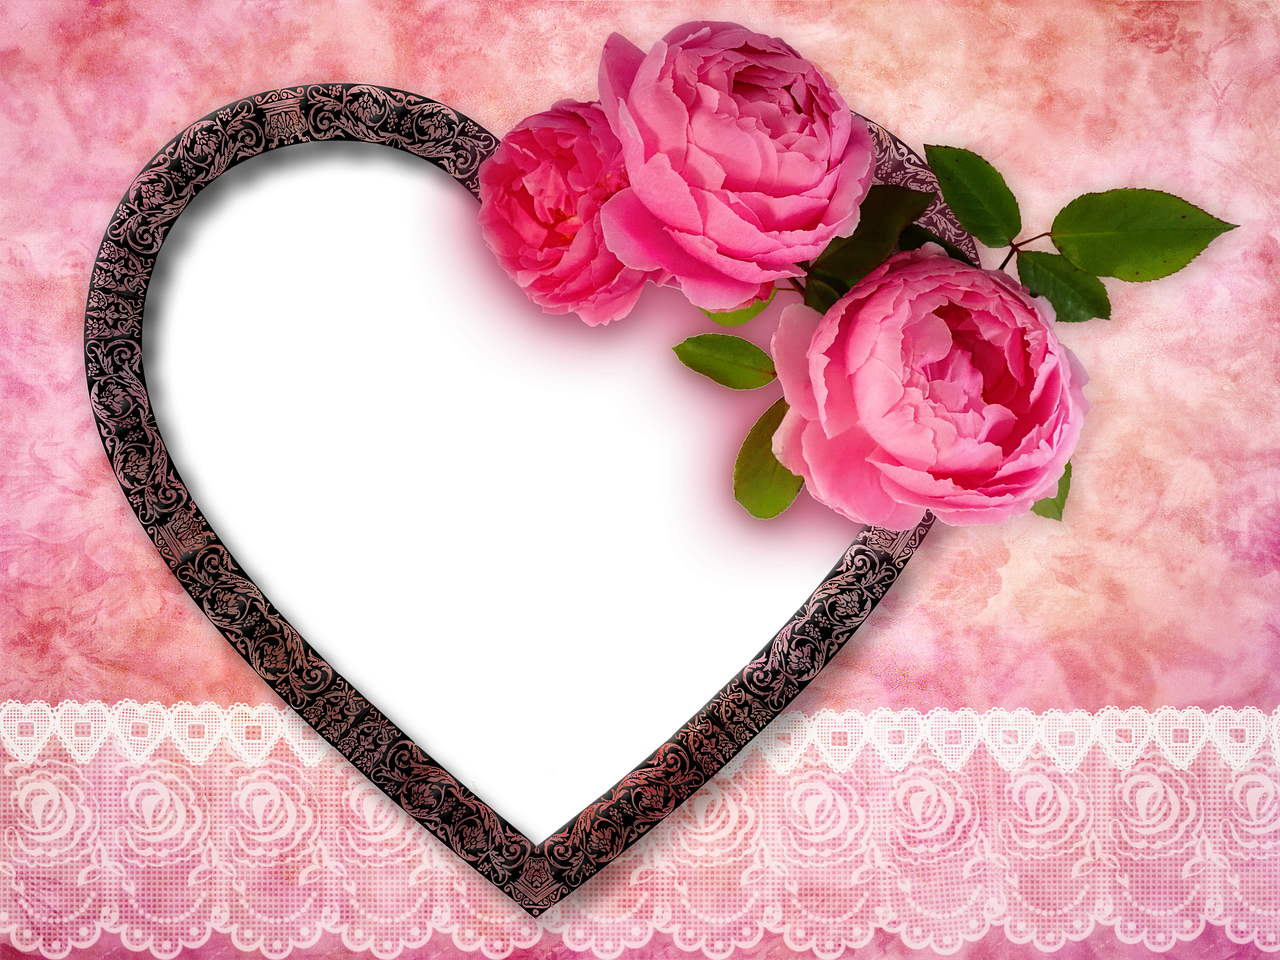 a picture frame in the shape of a heart with pink roses, a picture, inspired by Cindy Wright, pixabay contest winner, romanticism, black peonies, floral lacework, scrapbook, sandra chevier